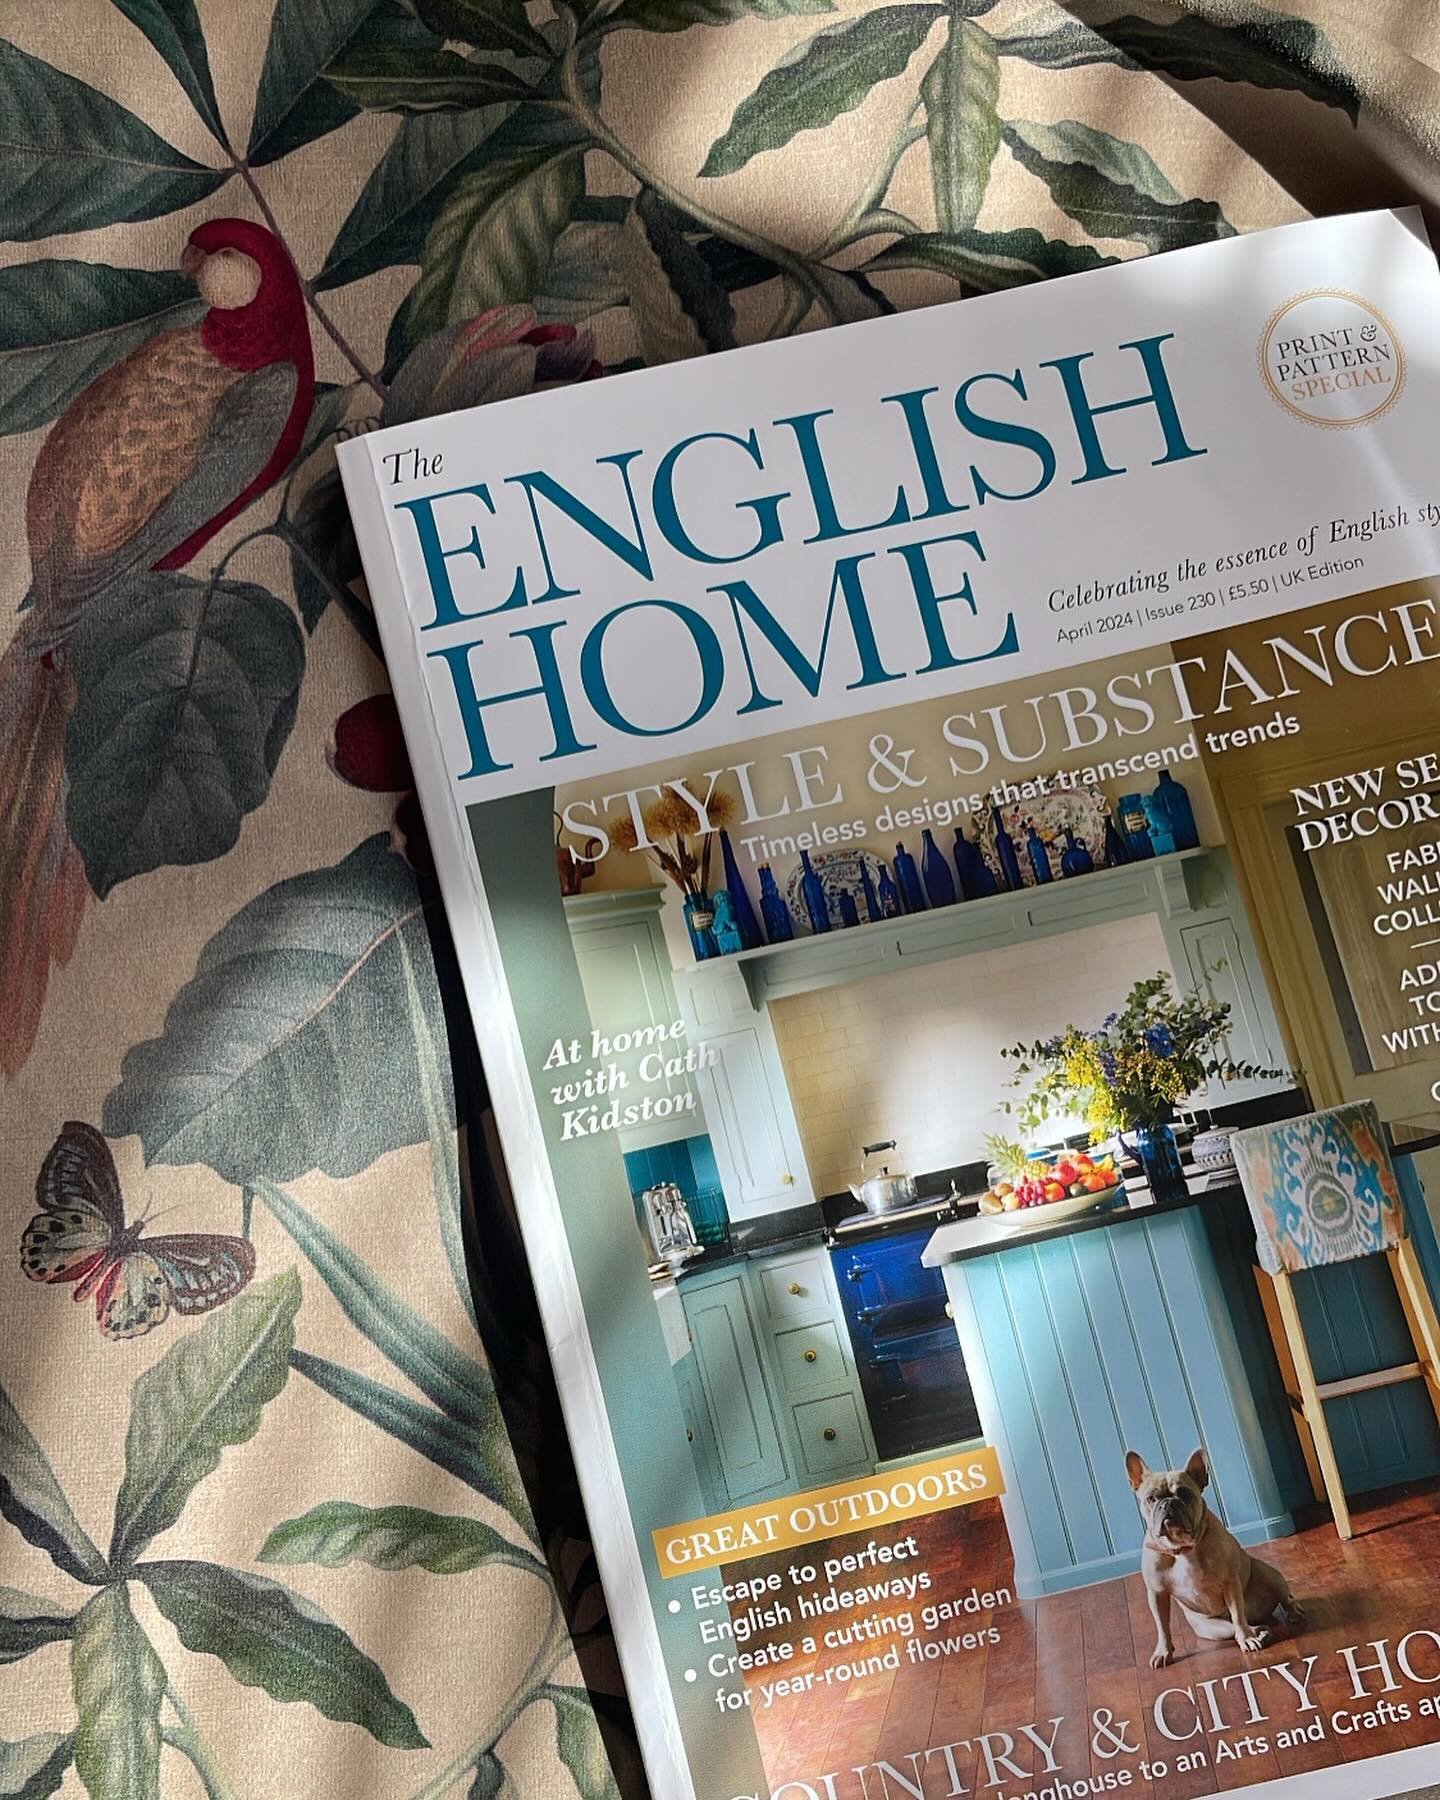 Still buzzing from seeing my fabrics for @deus.ex.gardenia.official featured in this months Print and Pattern Spring edition of @englishhomemag!